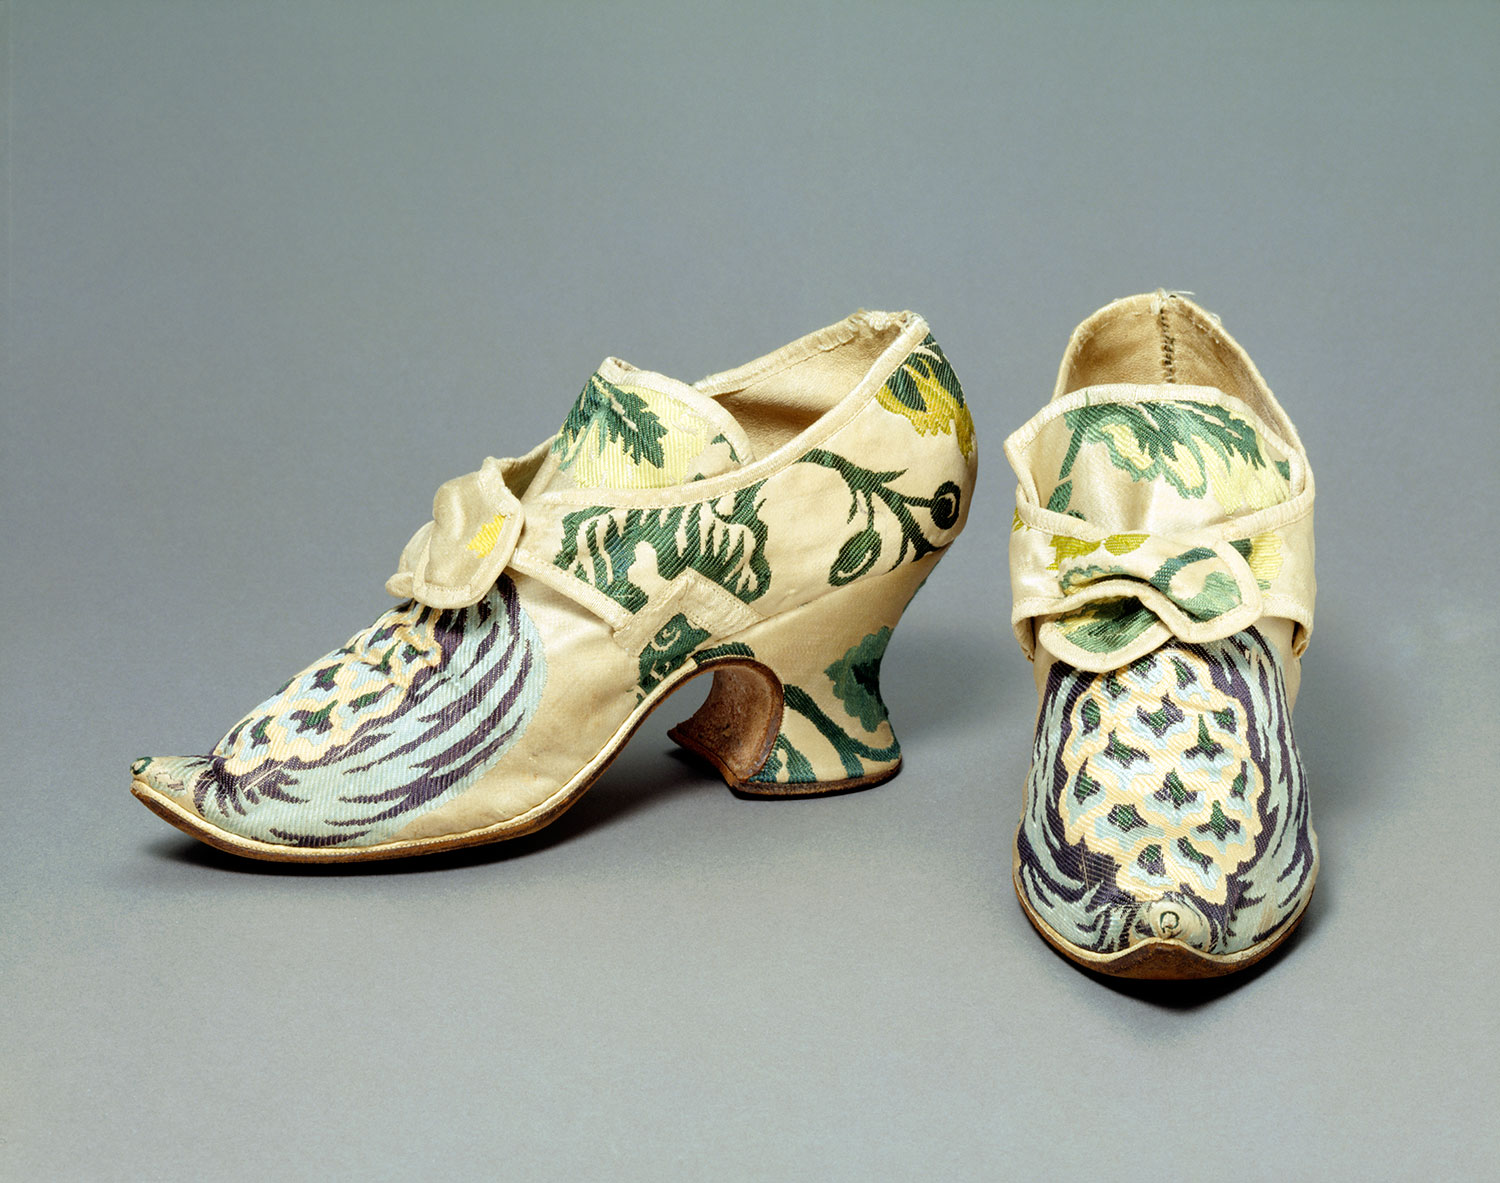 Pair of indoor shoes made with brocaded silk and leather, Spitalfields, c.1735.